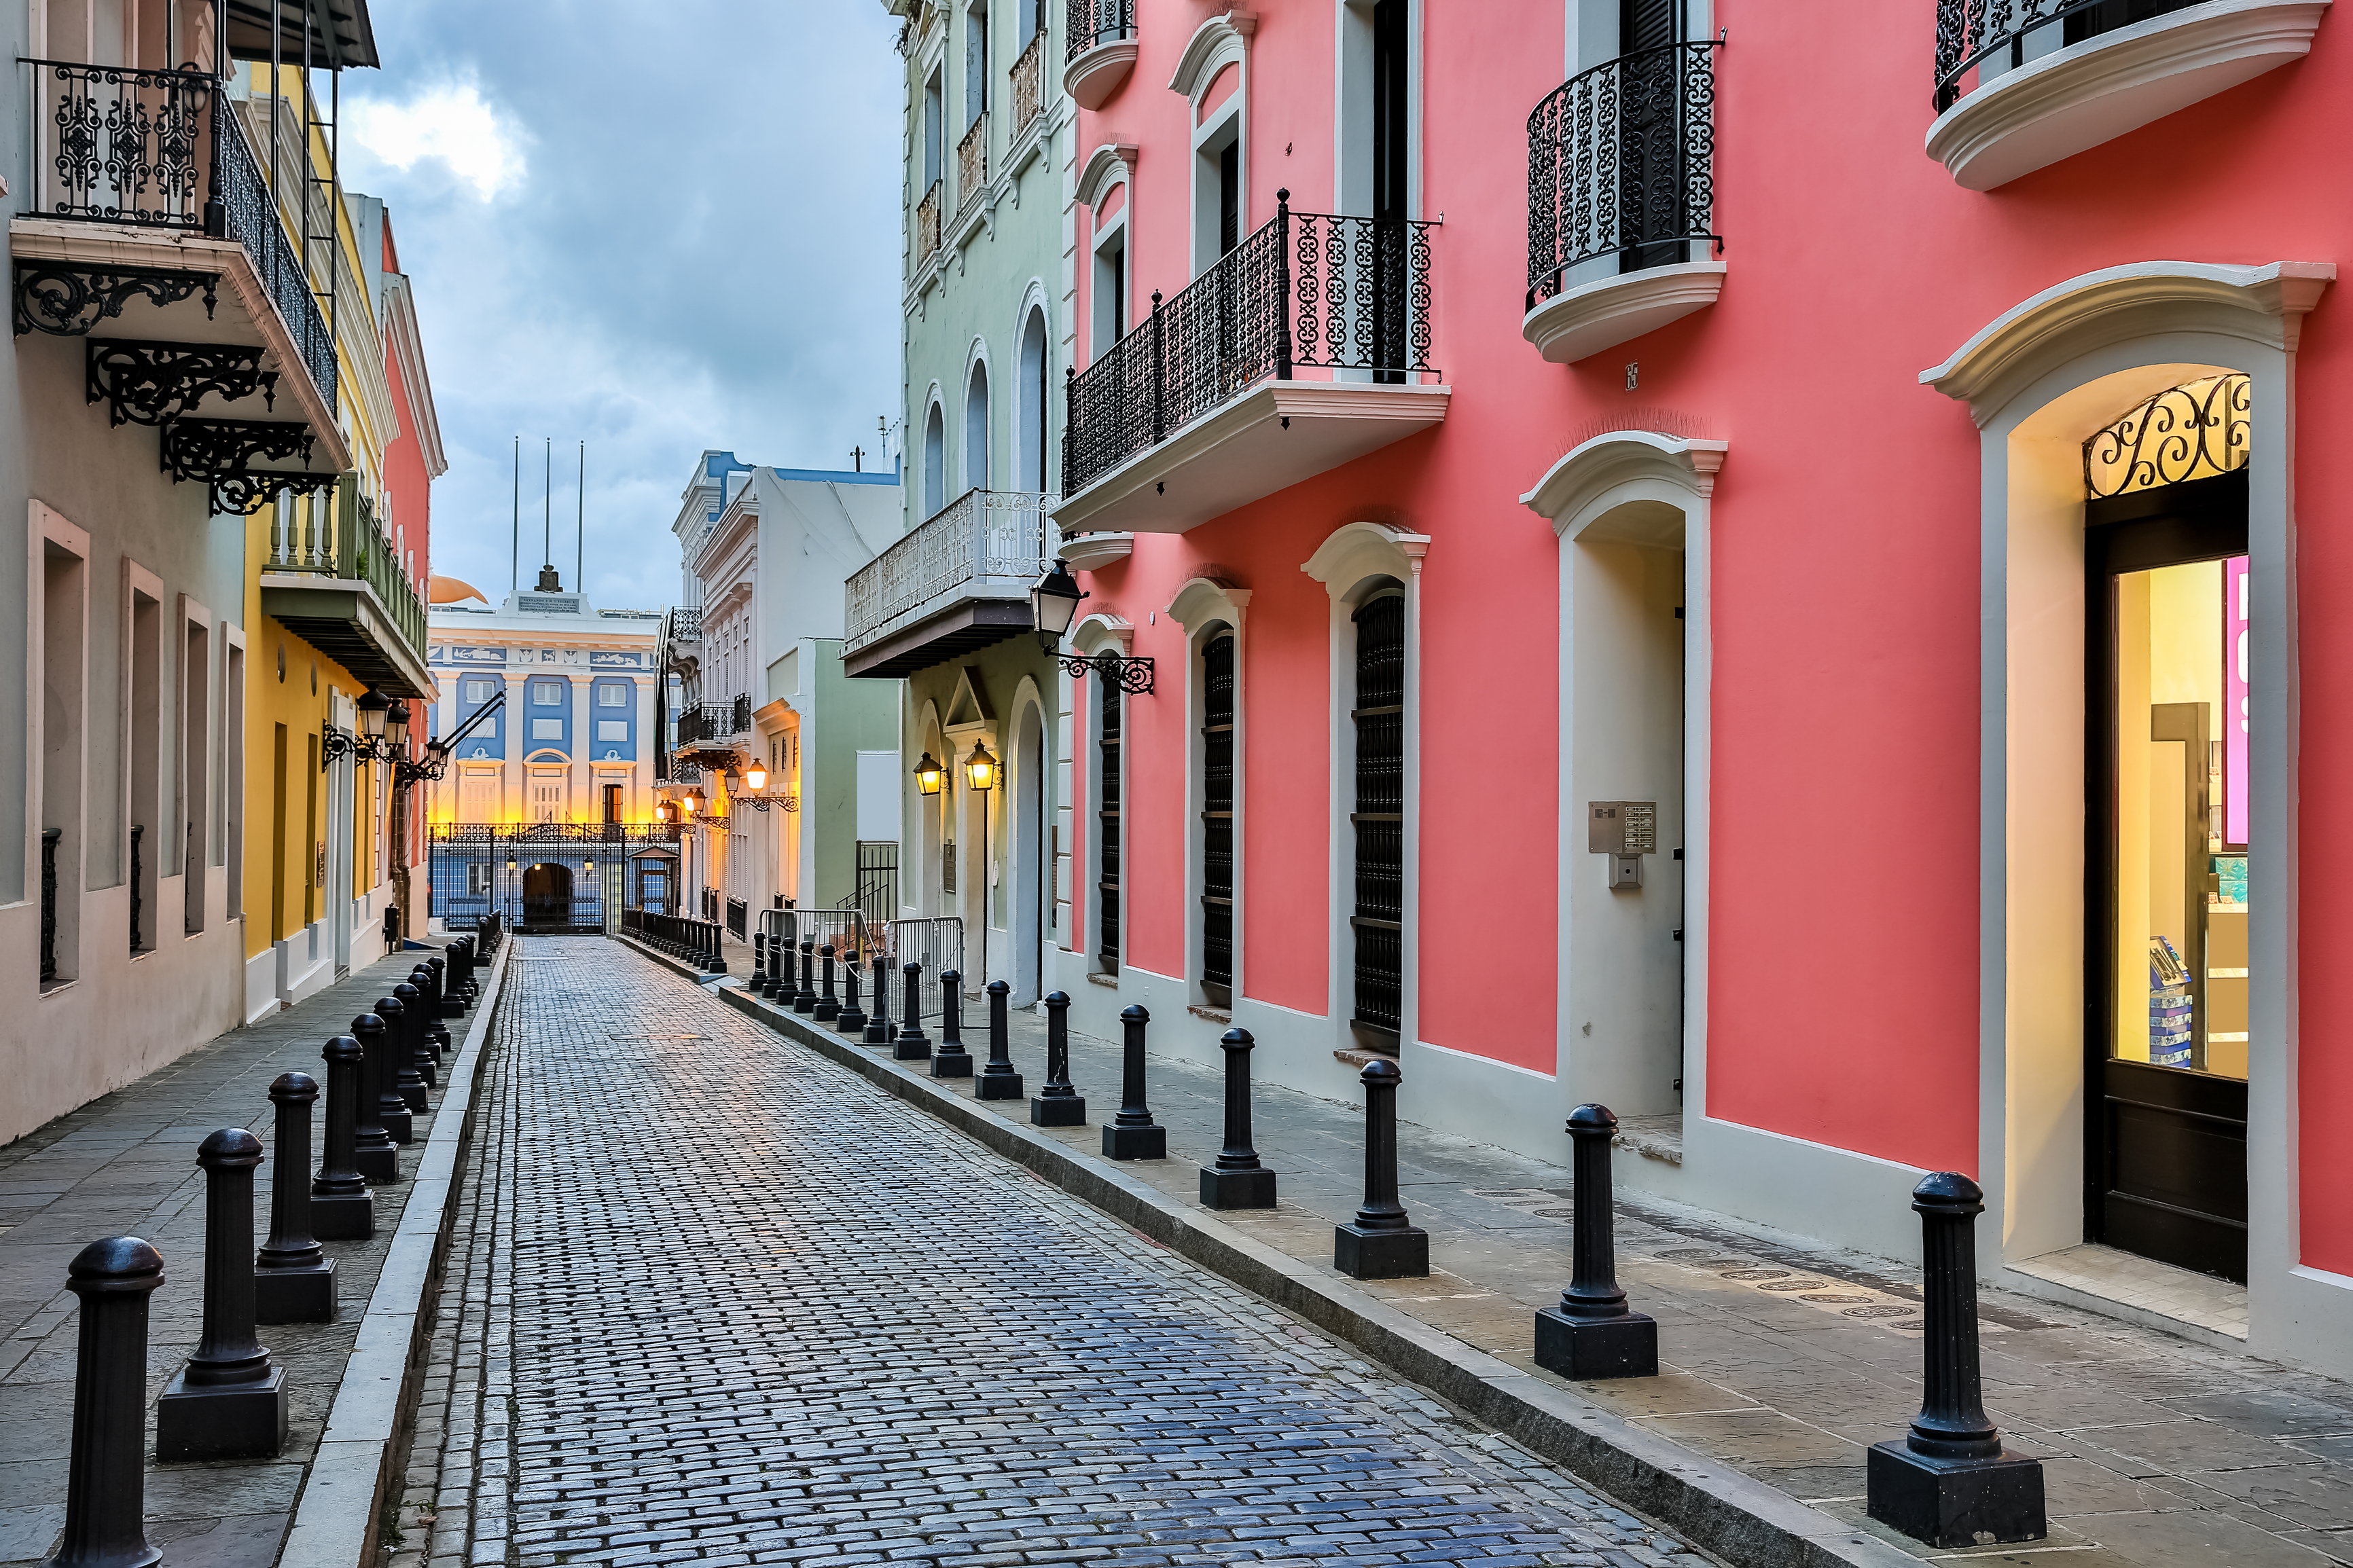 Today only: Flights to San Juan from $68 round-trip